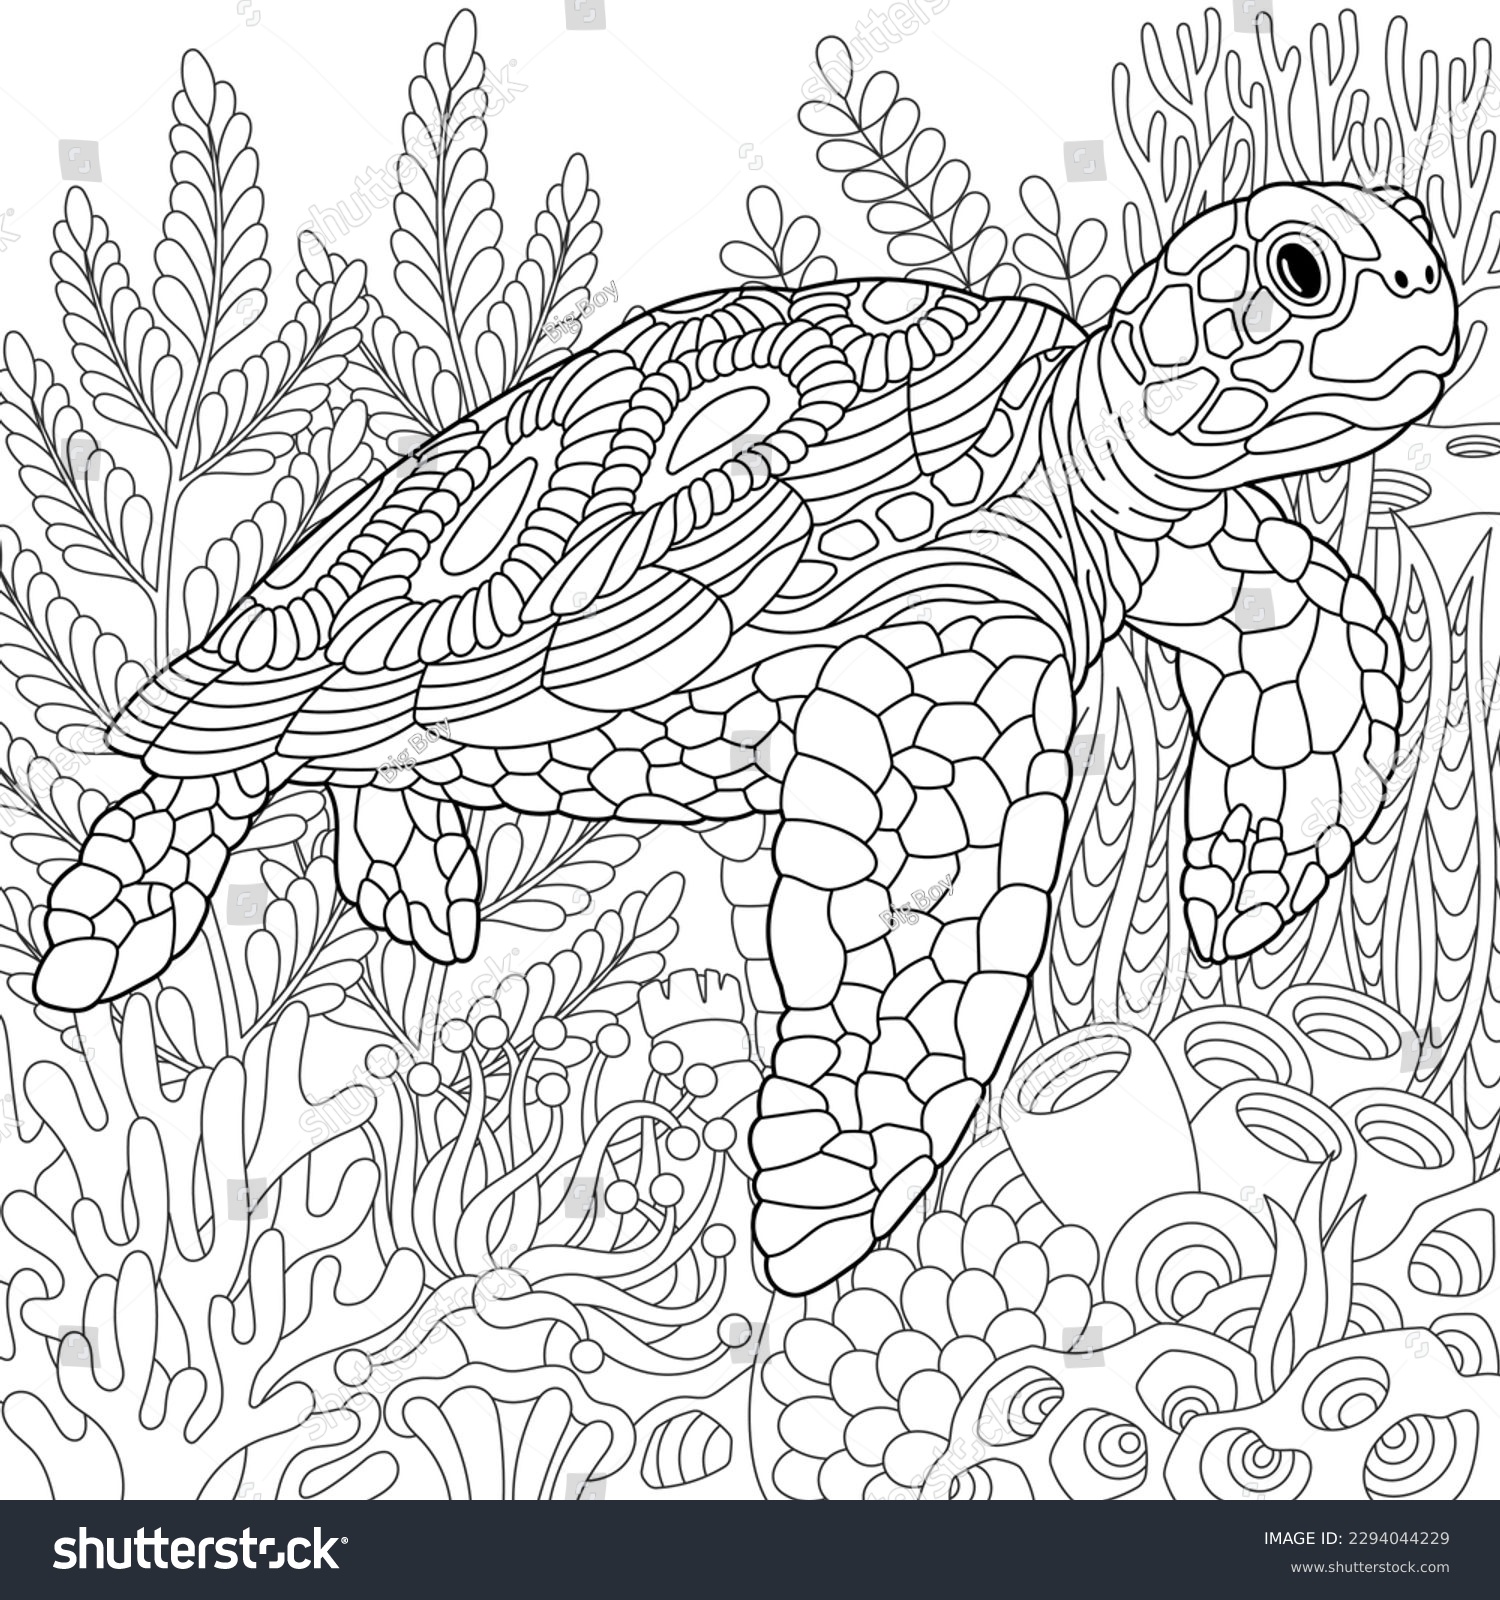 SVG of Underwater scene with a turtle. Adult coloring book page with intricate mandala and zentangle elements svg